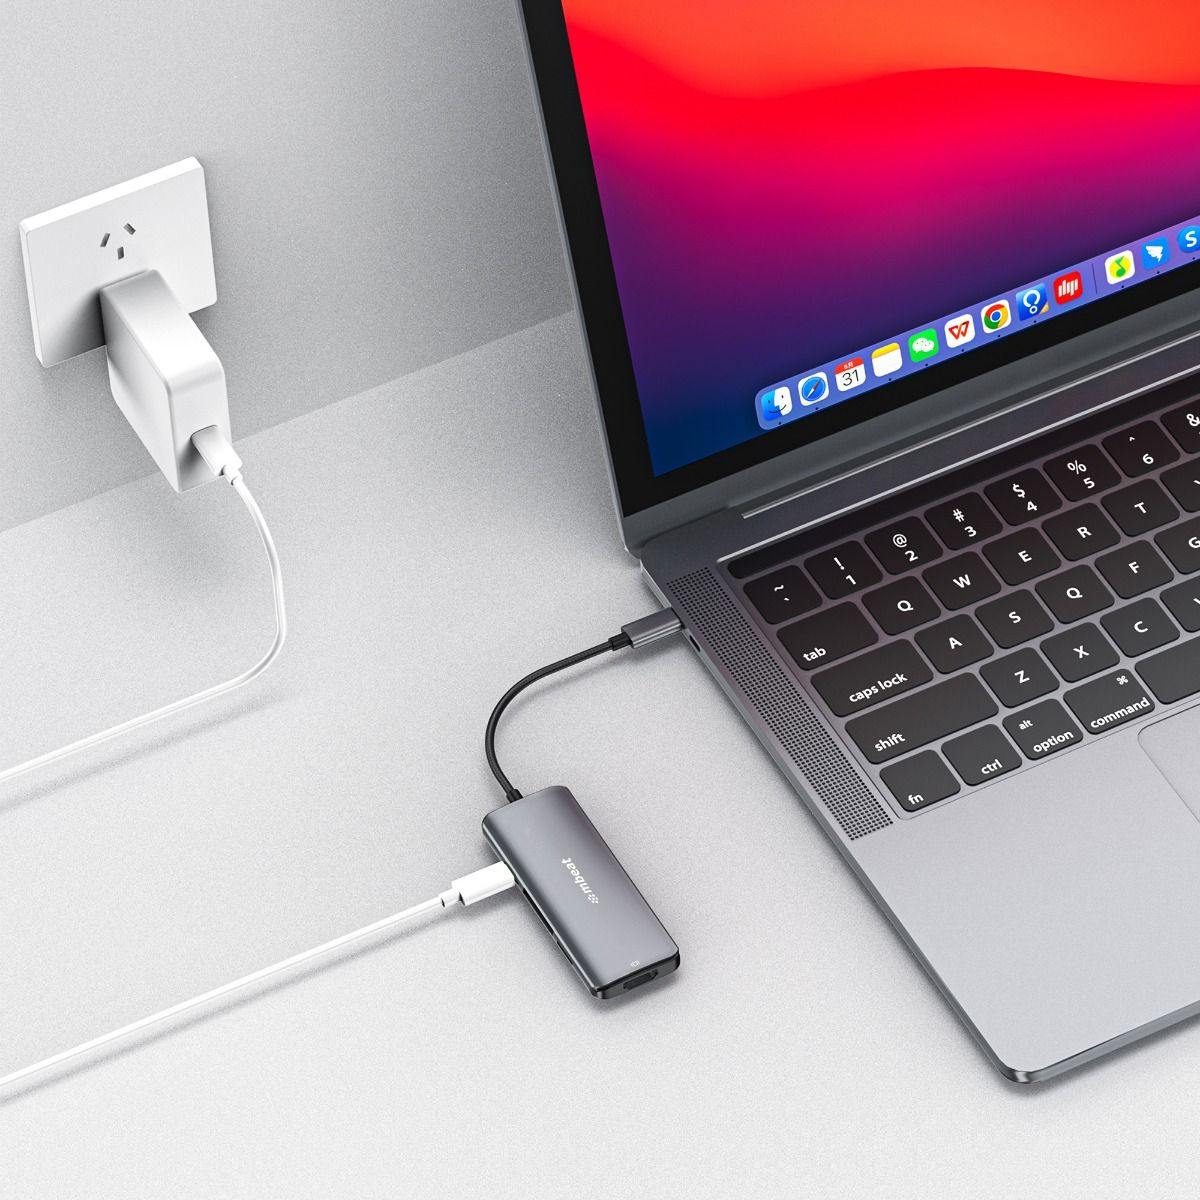 Multifunctionality: 7-in-1 USB-C 3.2 Gen2 Hub with 8K Video and 10Gbps